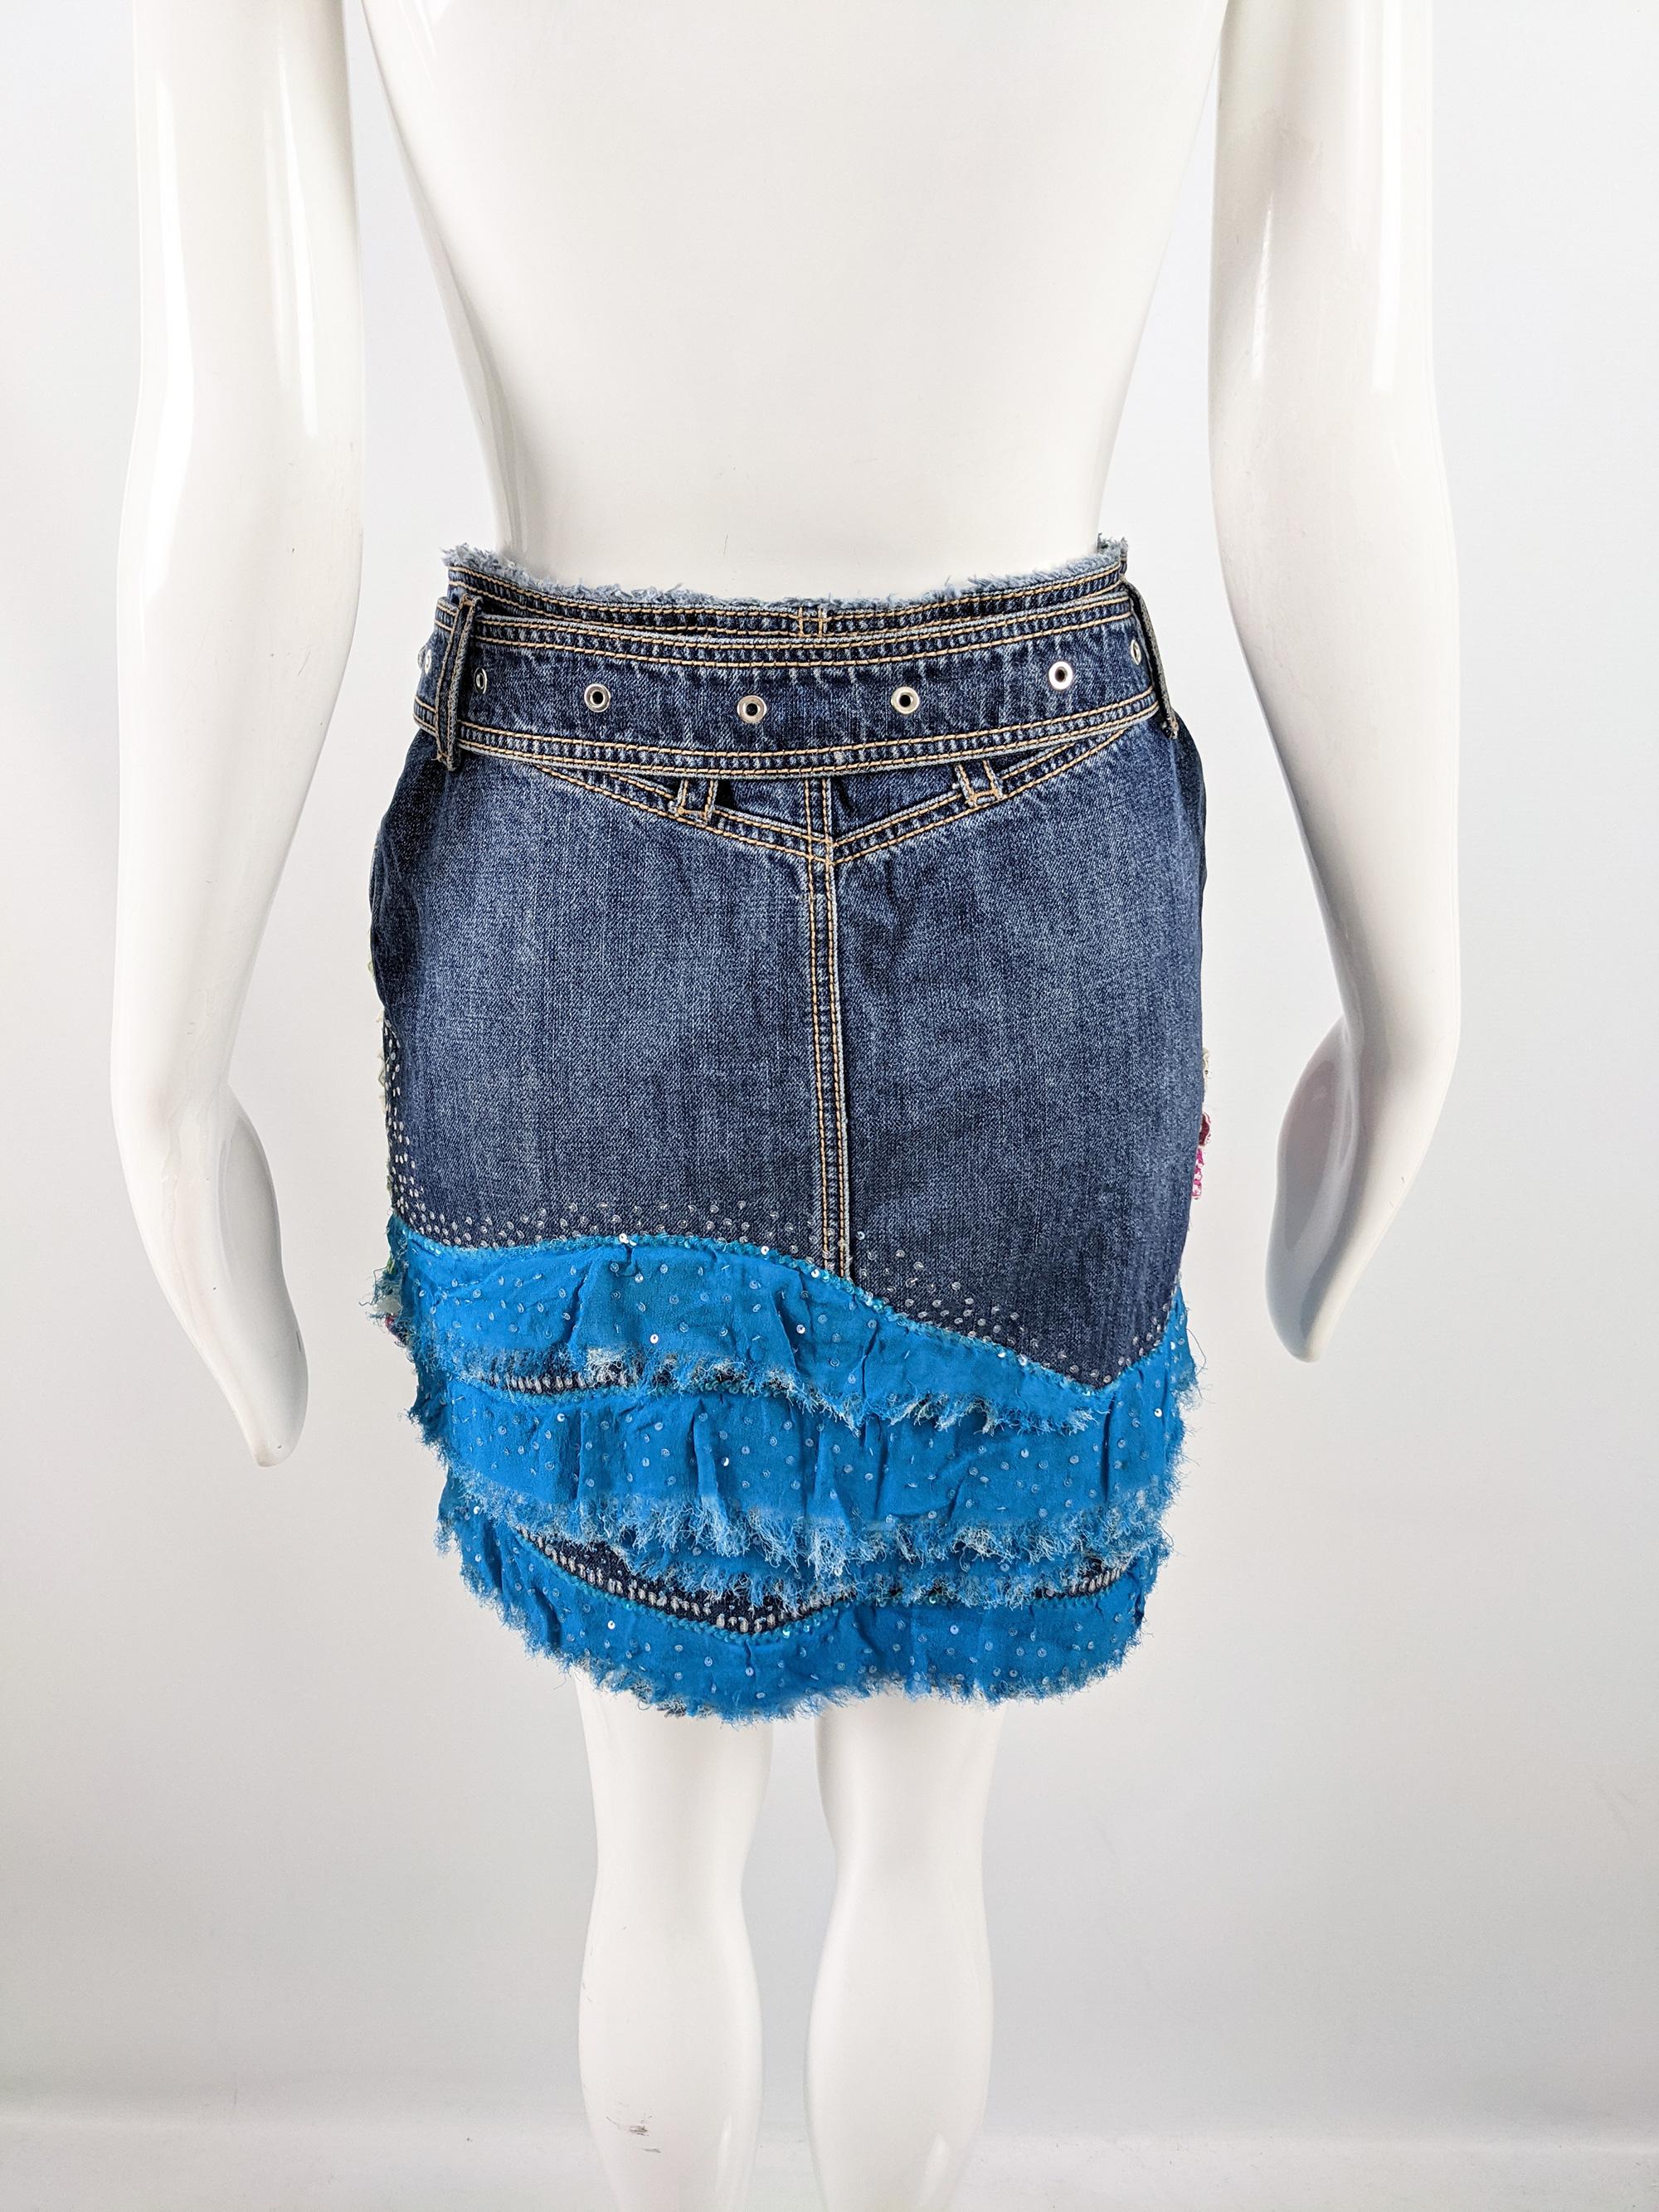 Escada Vintage y2k Sequin Chiffon Applique Belted Mini Denim Skirt, 2000s In Good Condition For Sale In Doncaster, South Yorkshire